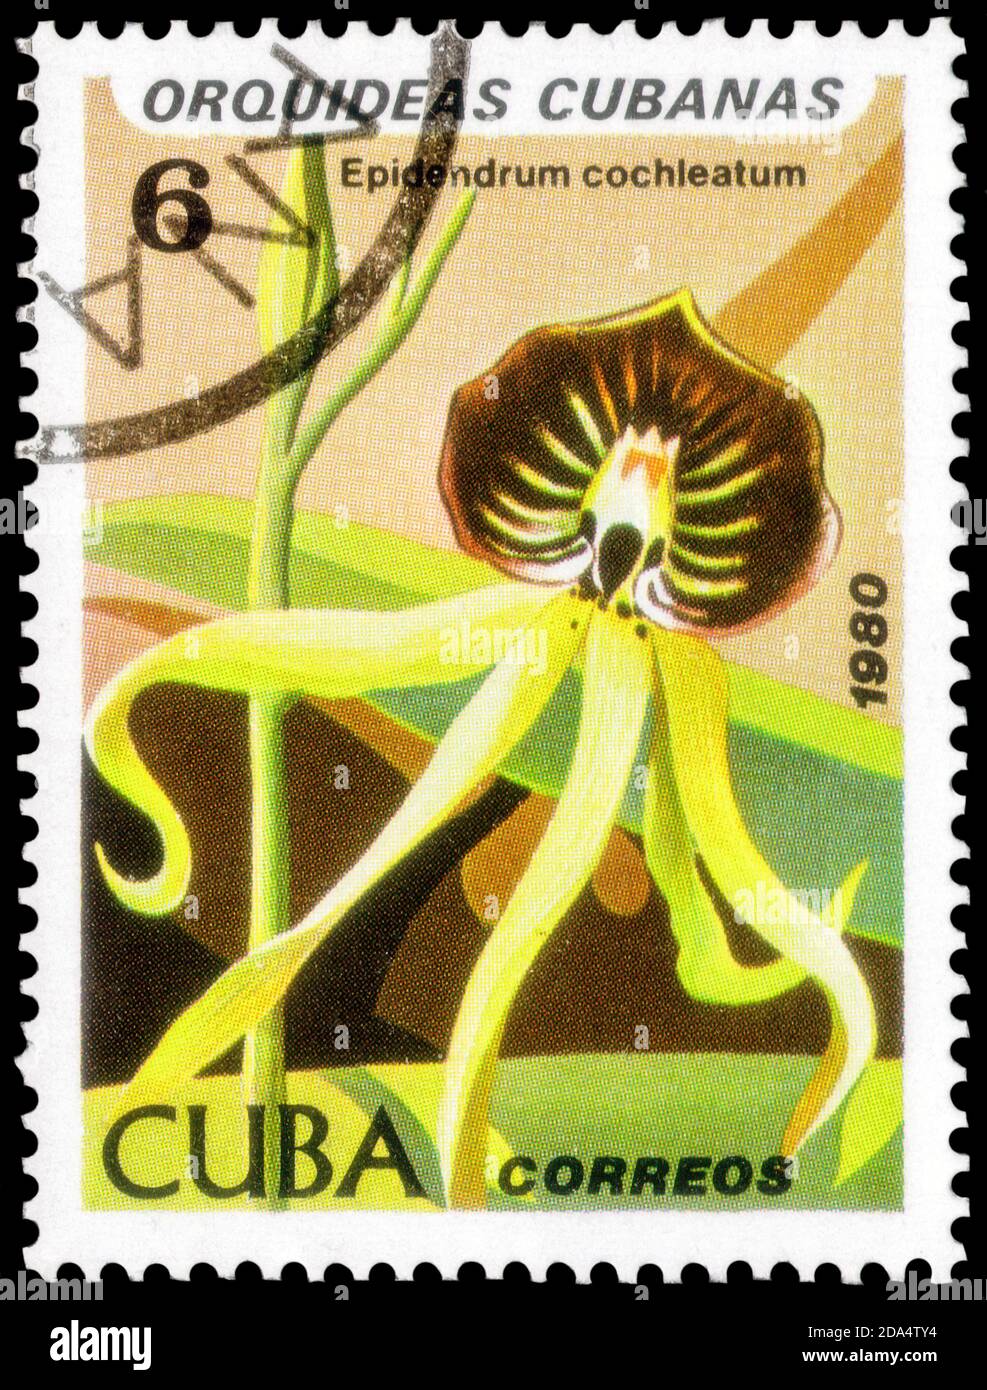 Saint Petersburg, Russia - September 18, 2020: Stamp printed in the Cuba with the image of the Epidendrum cochleatum, circa 1980 Stock Photo